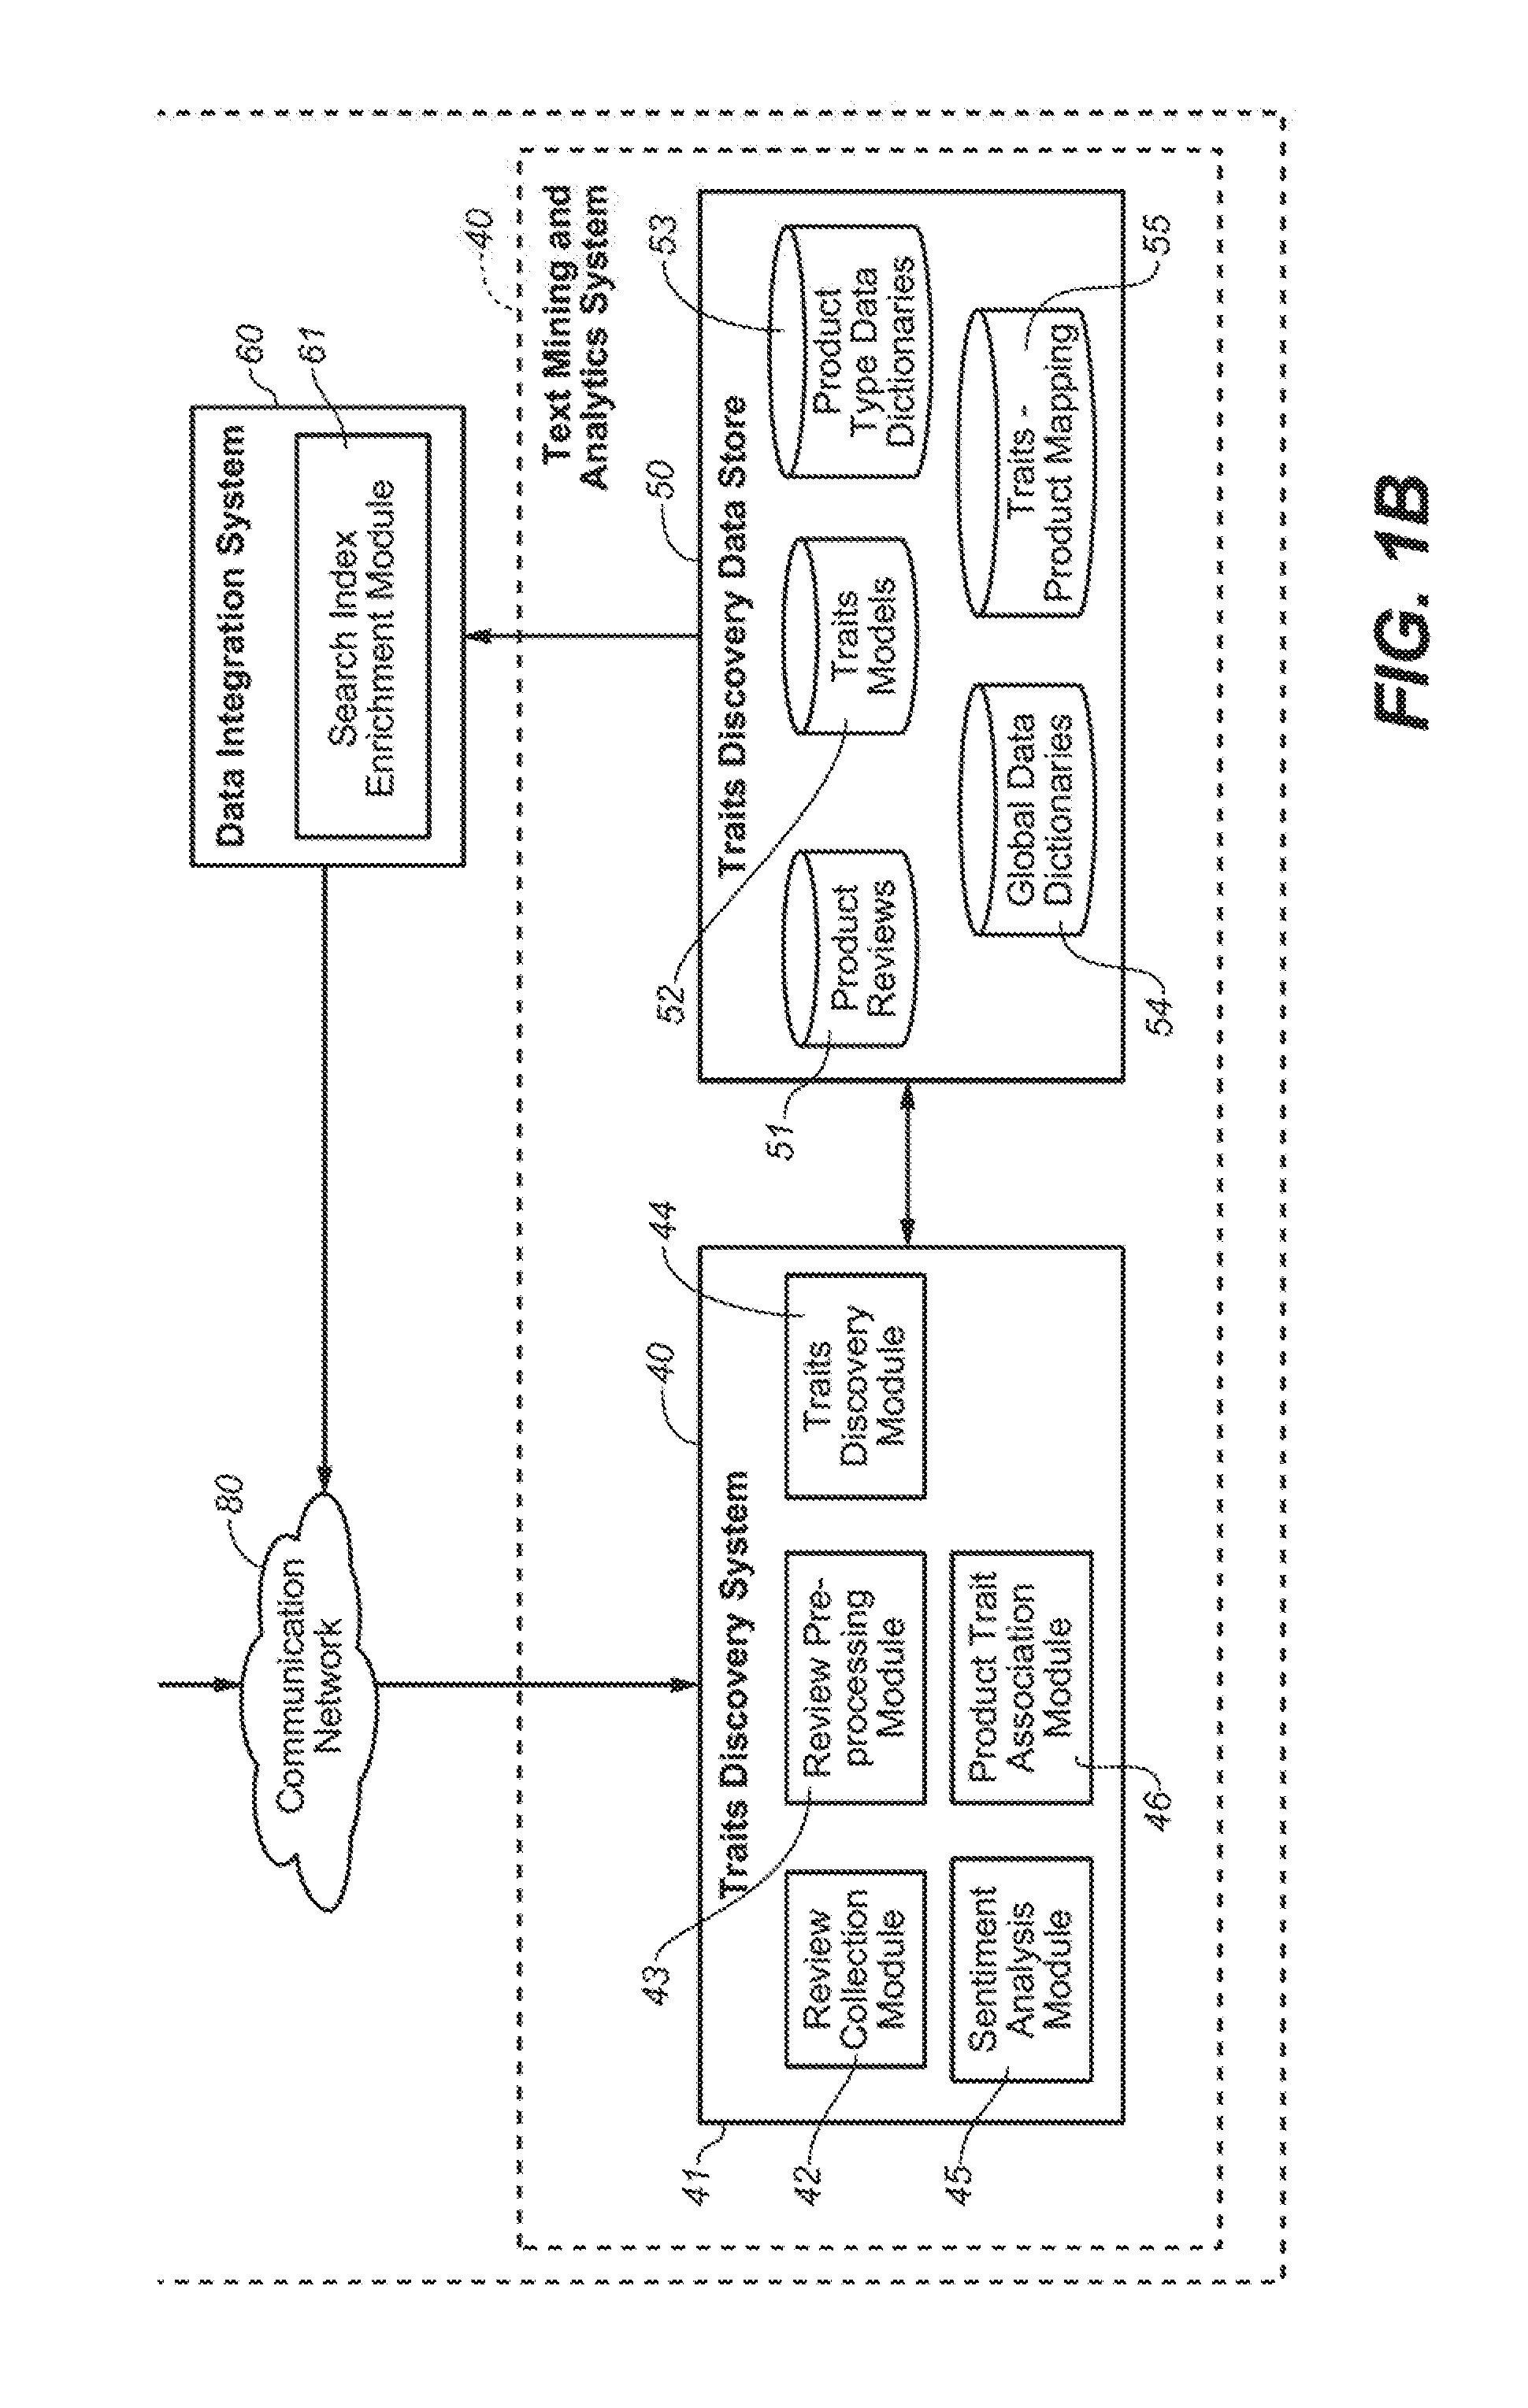 Review based navigation and product discovery platform and method of using same